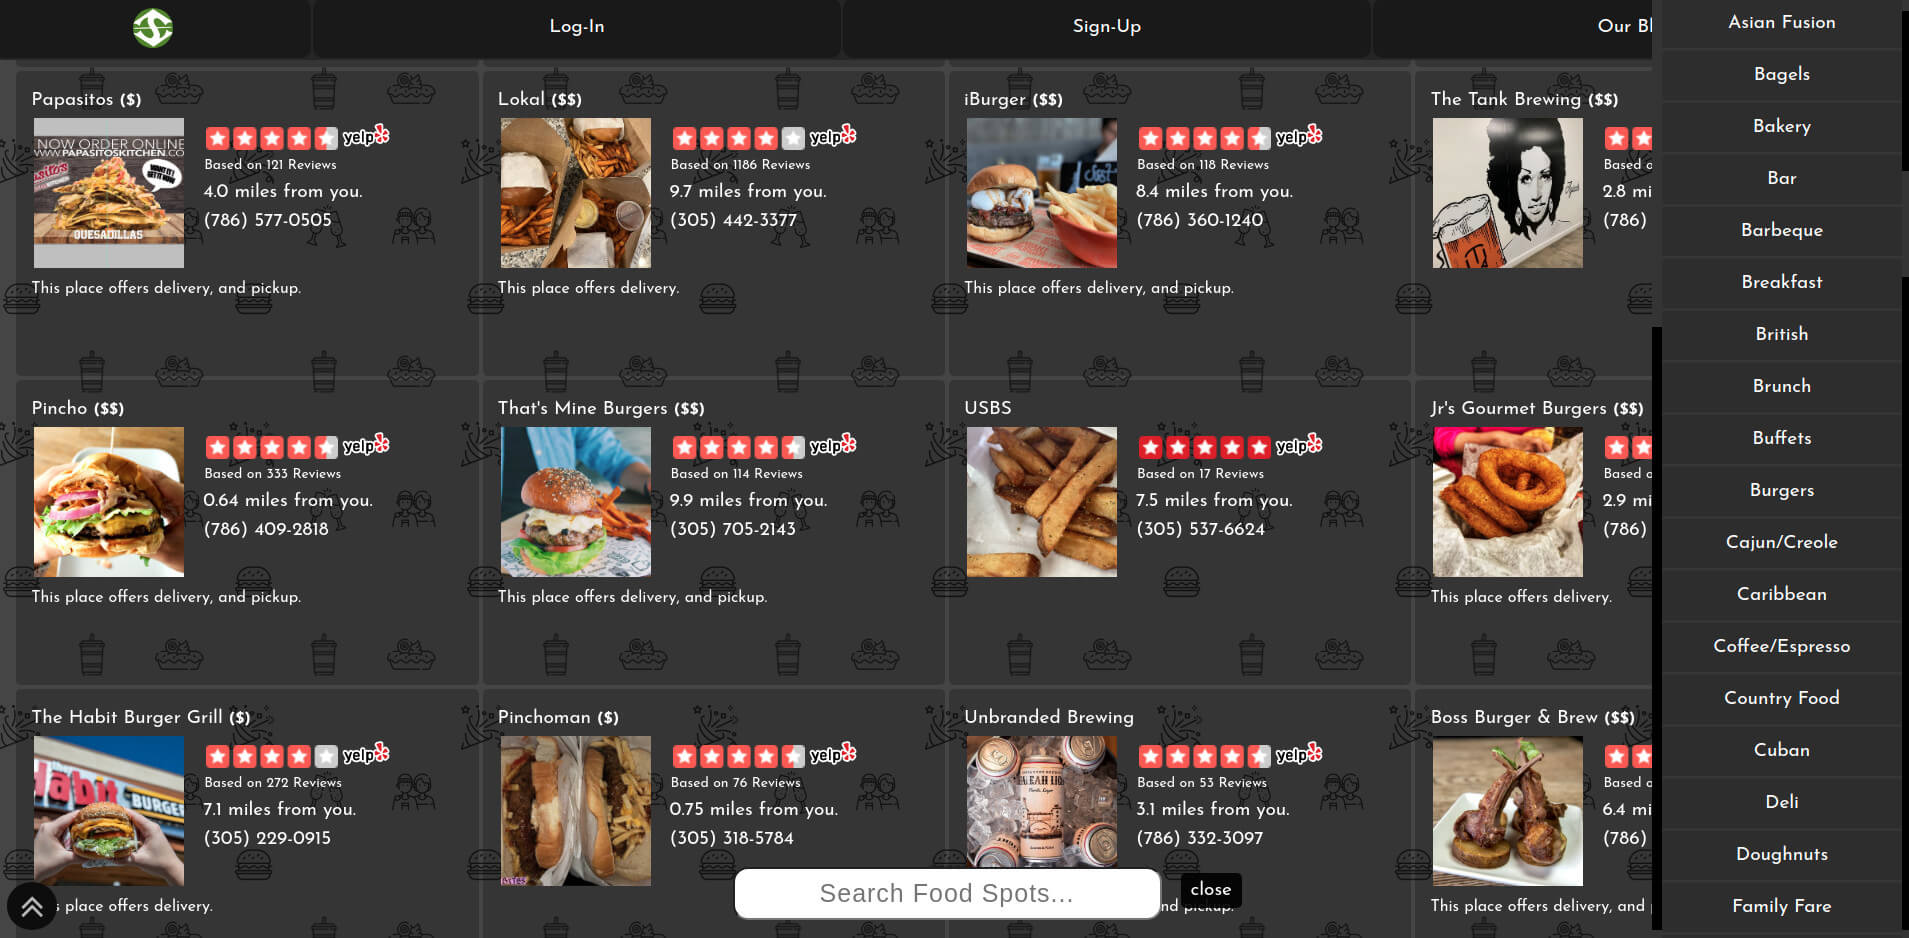 Image of SpotBie UI displaying the best Burger Restaurants around users.